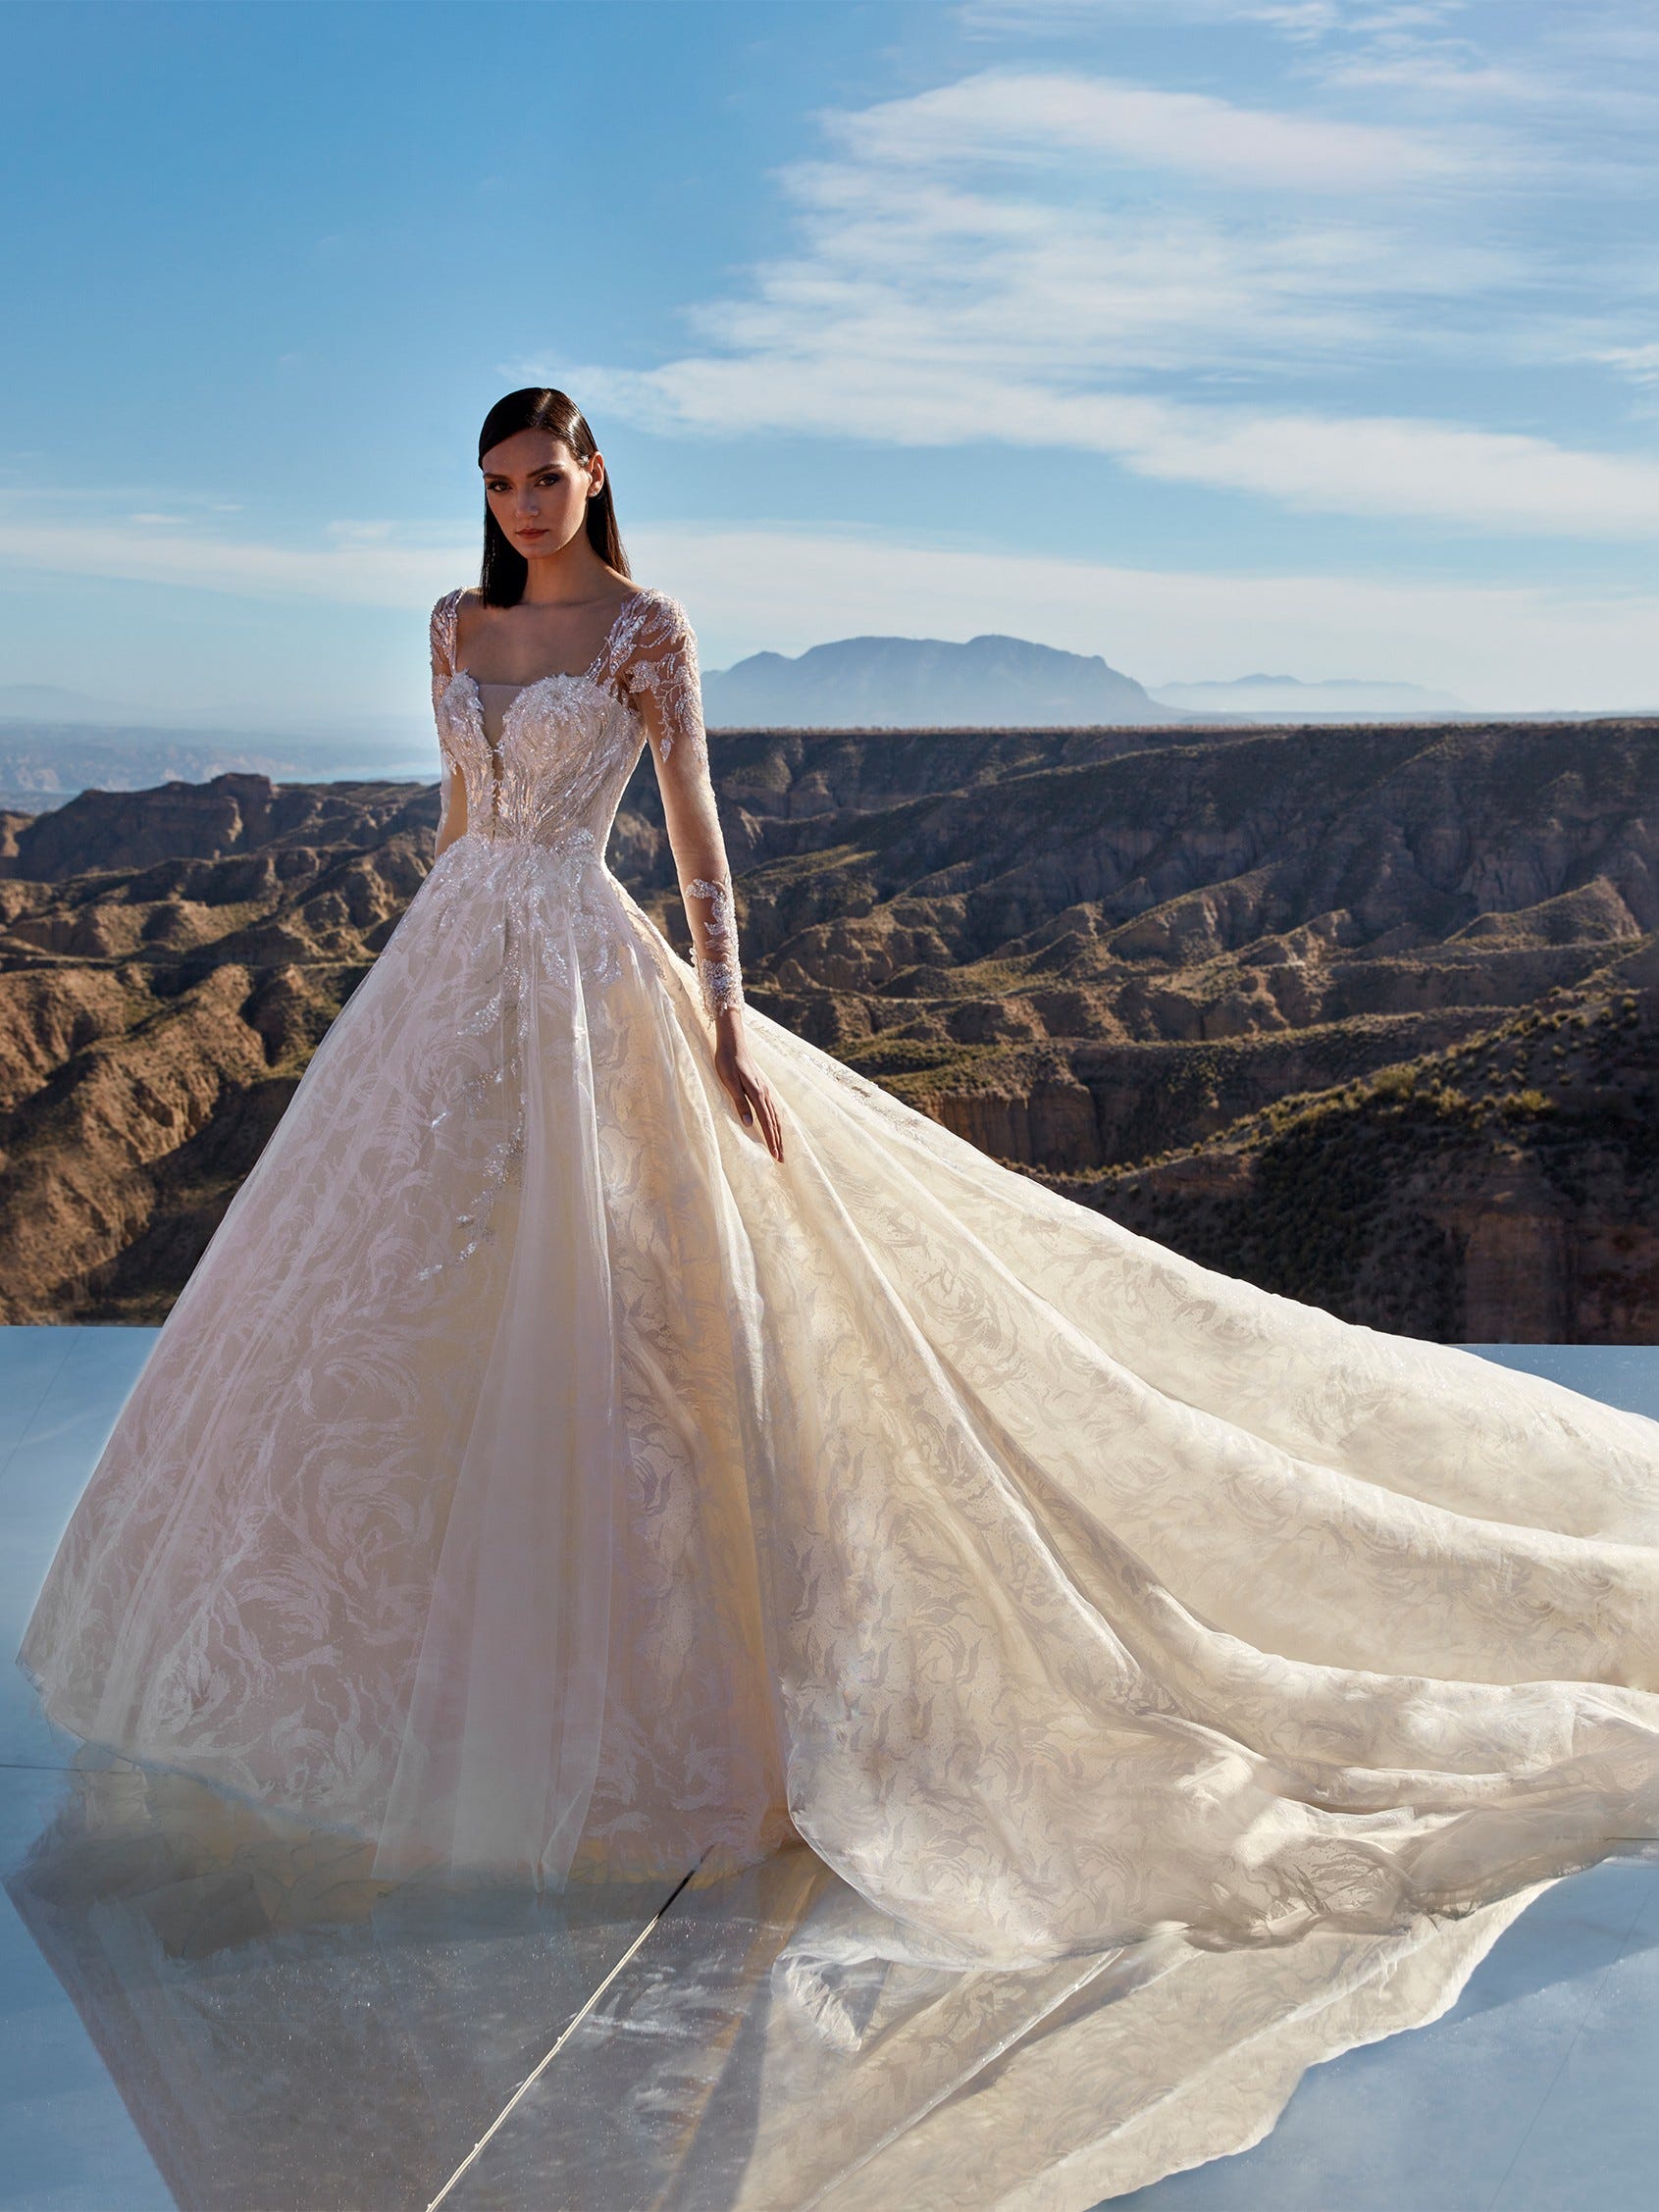 Consignment Wedding Dresses: Why and How to Sell - Heritage Garment  Preservation